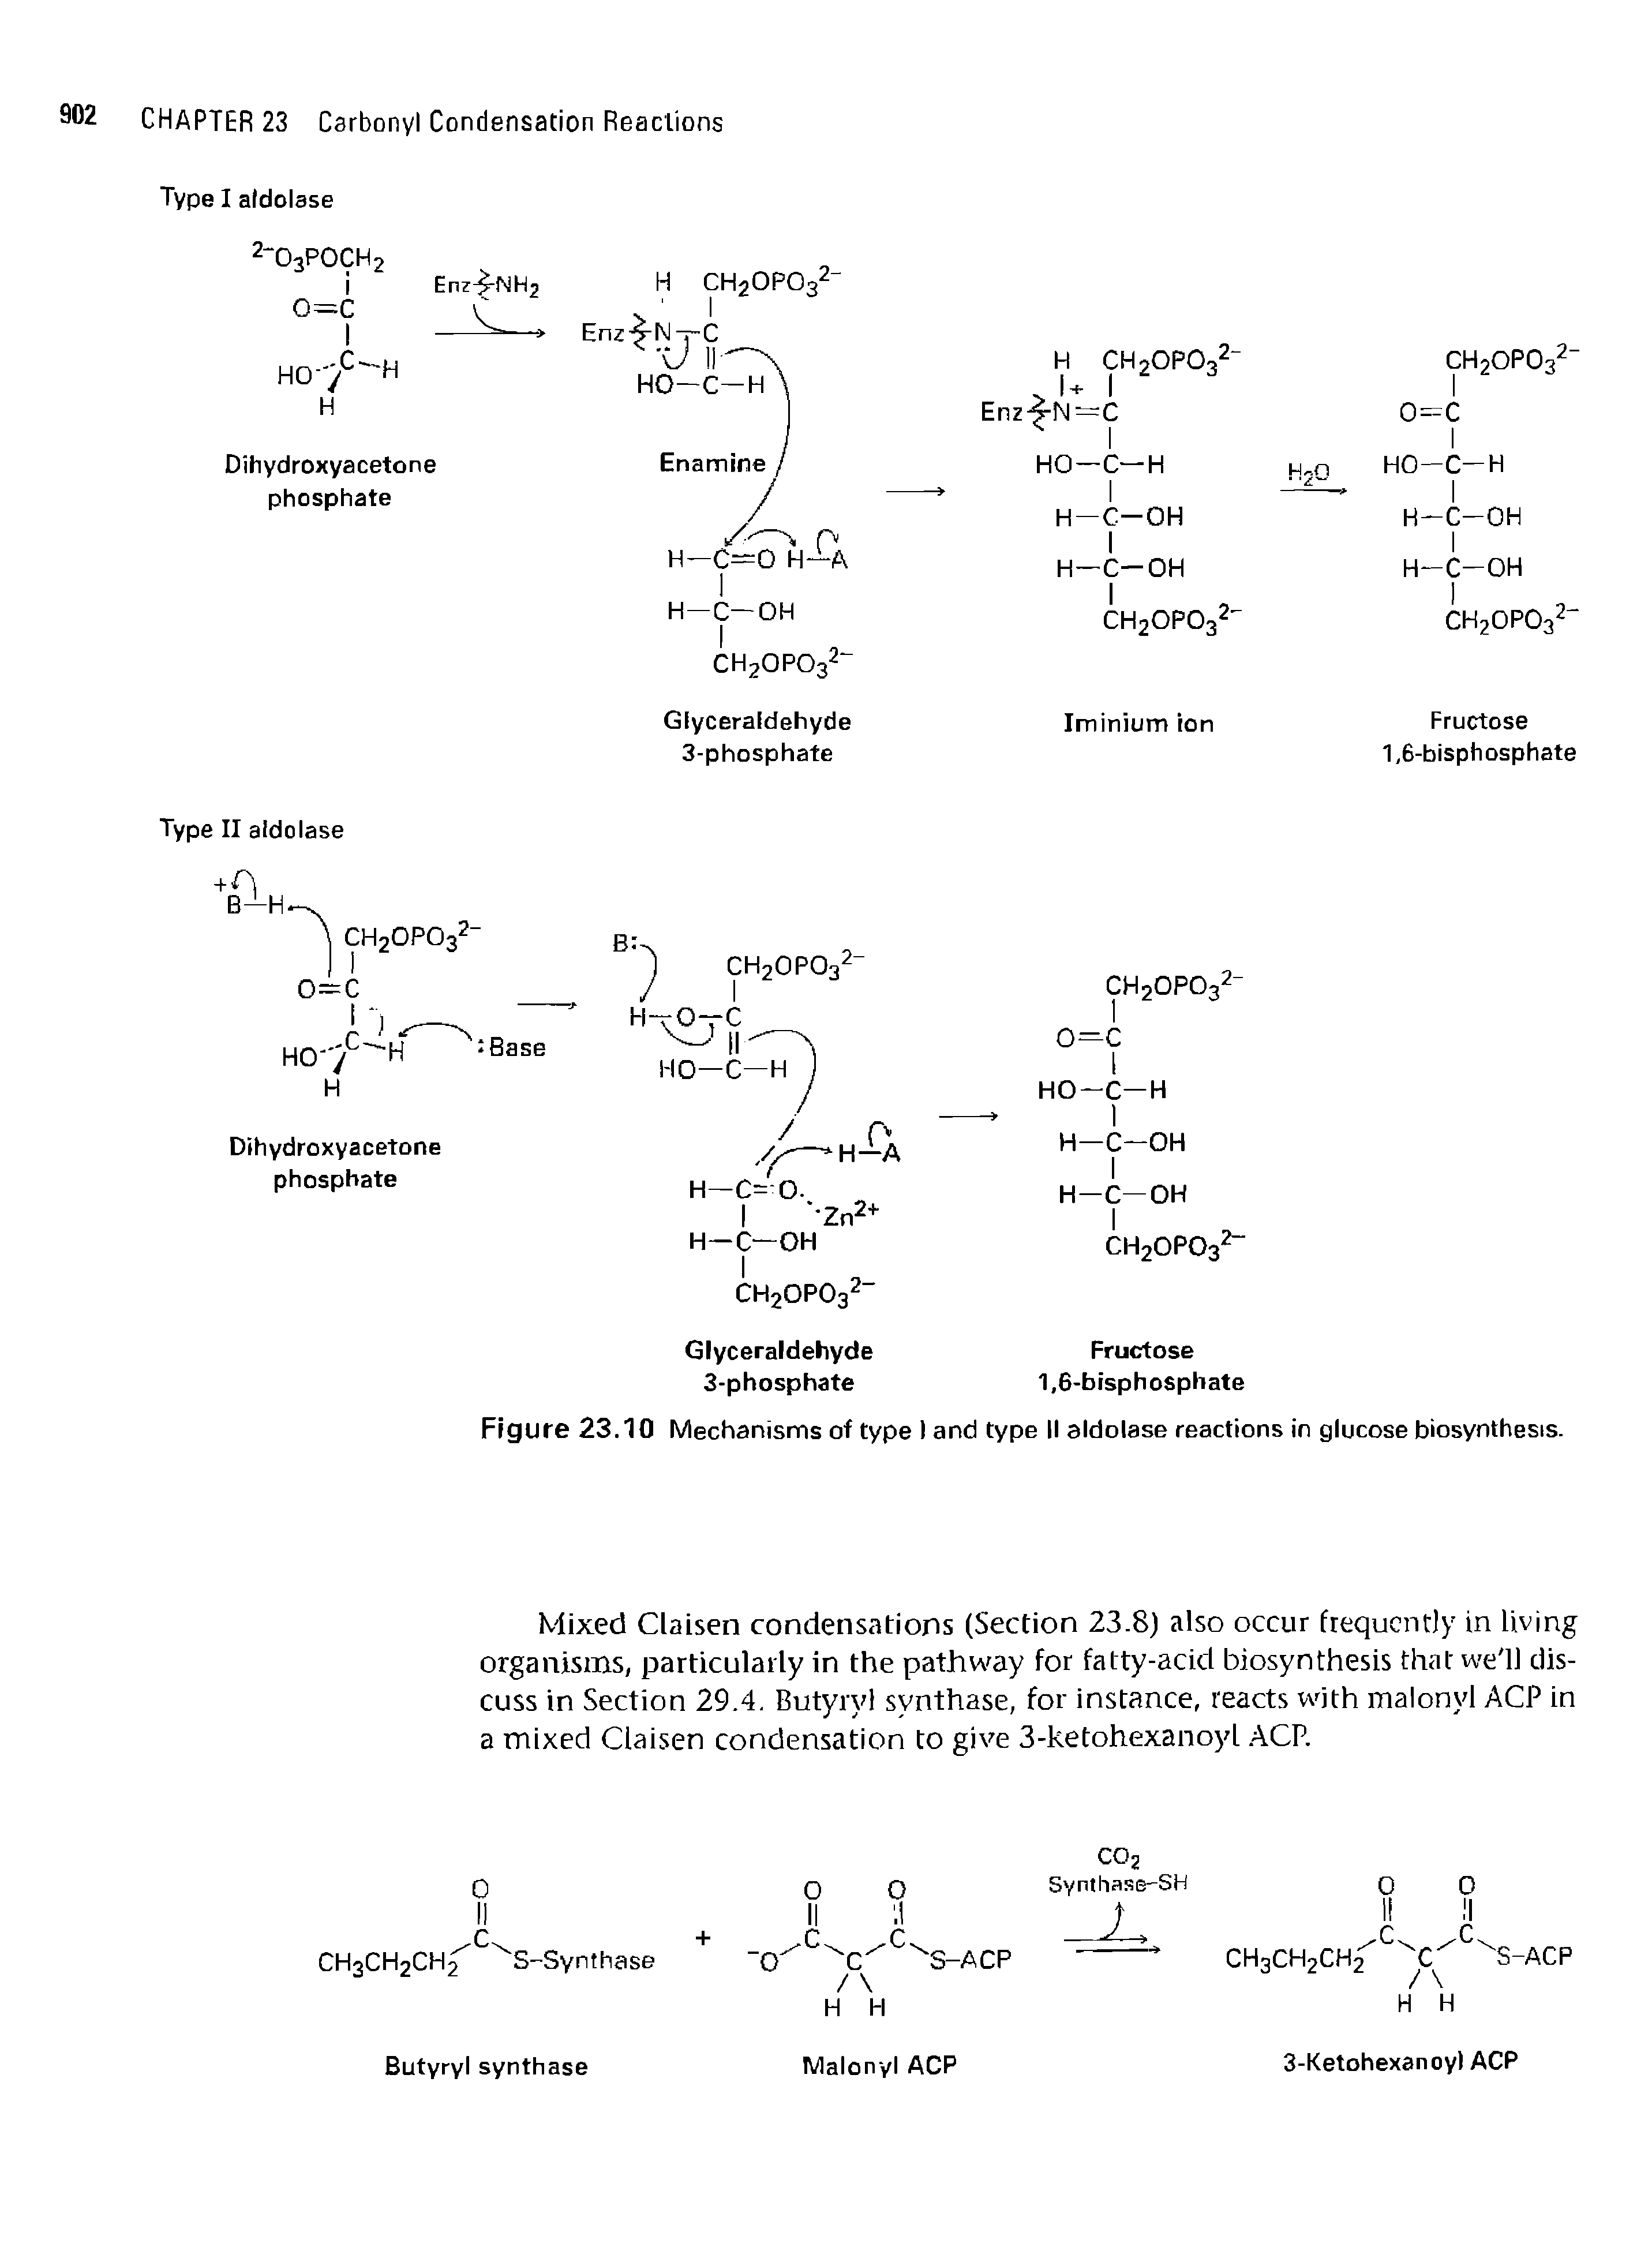 Figure 23.10 Mechanisms of type I and type II aldolase reactions in glucose biosynthesis.